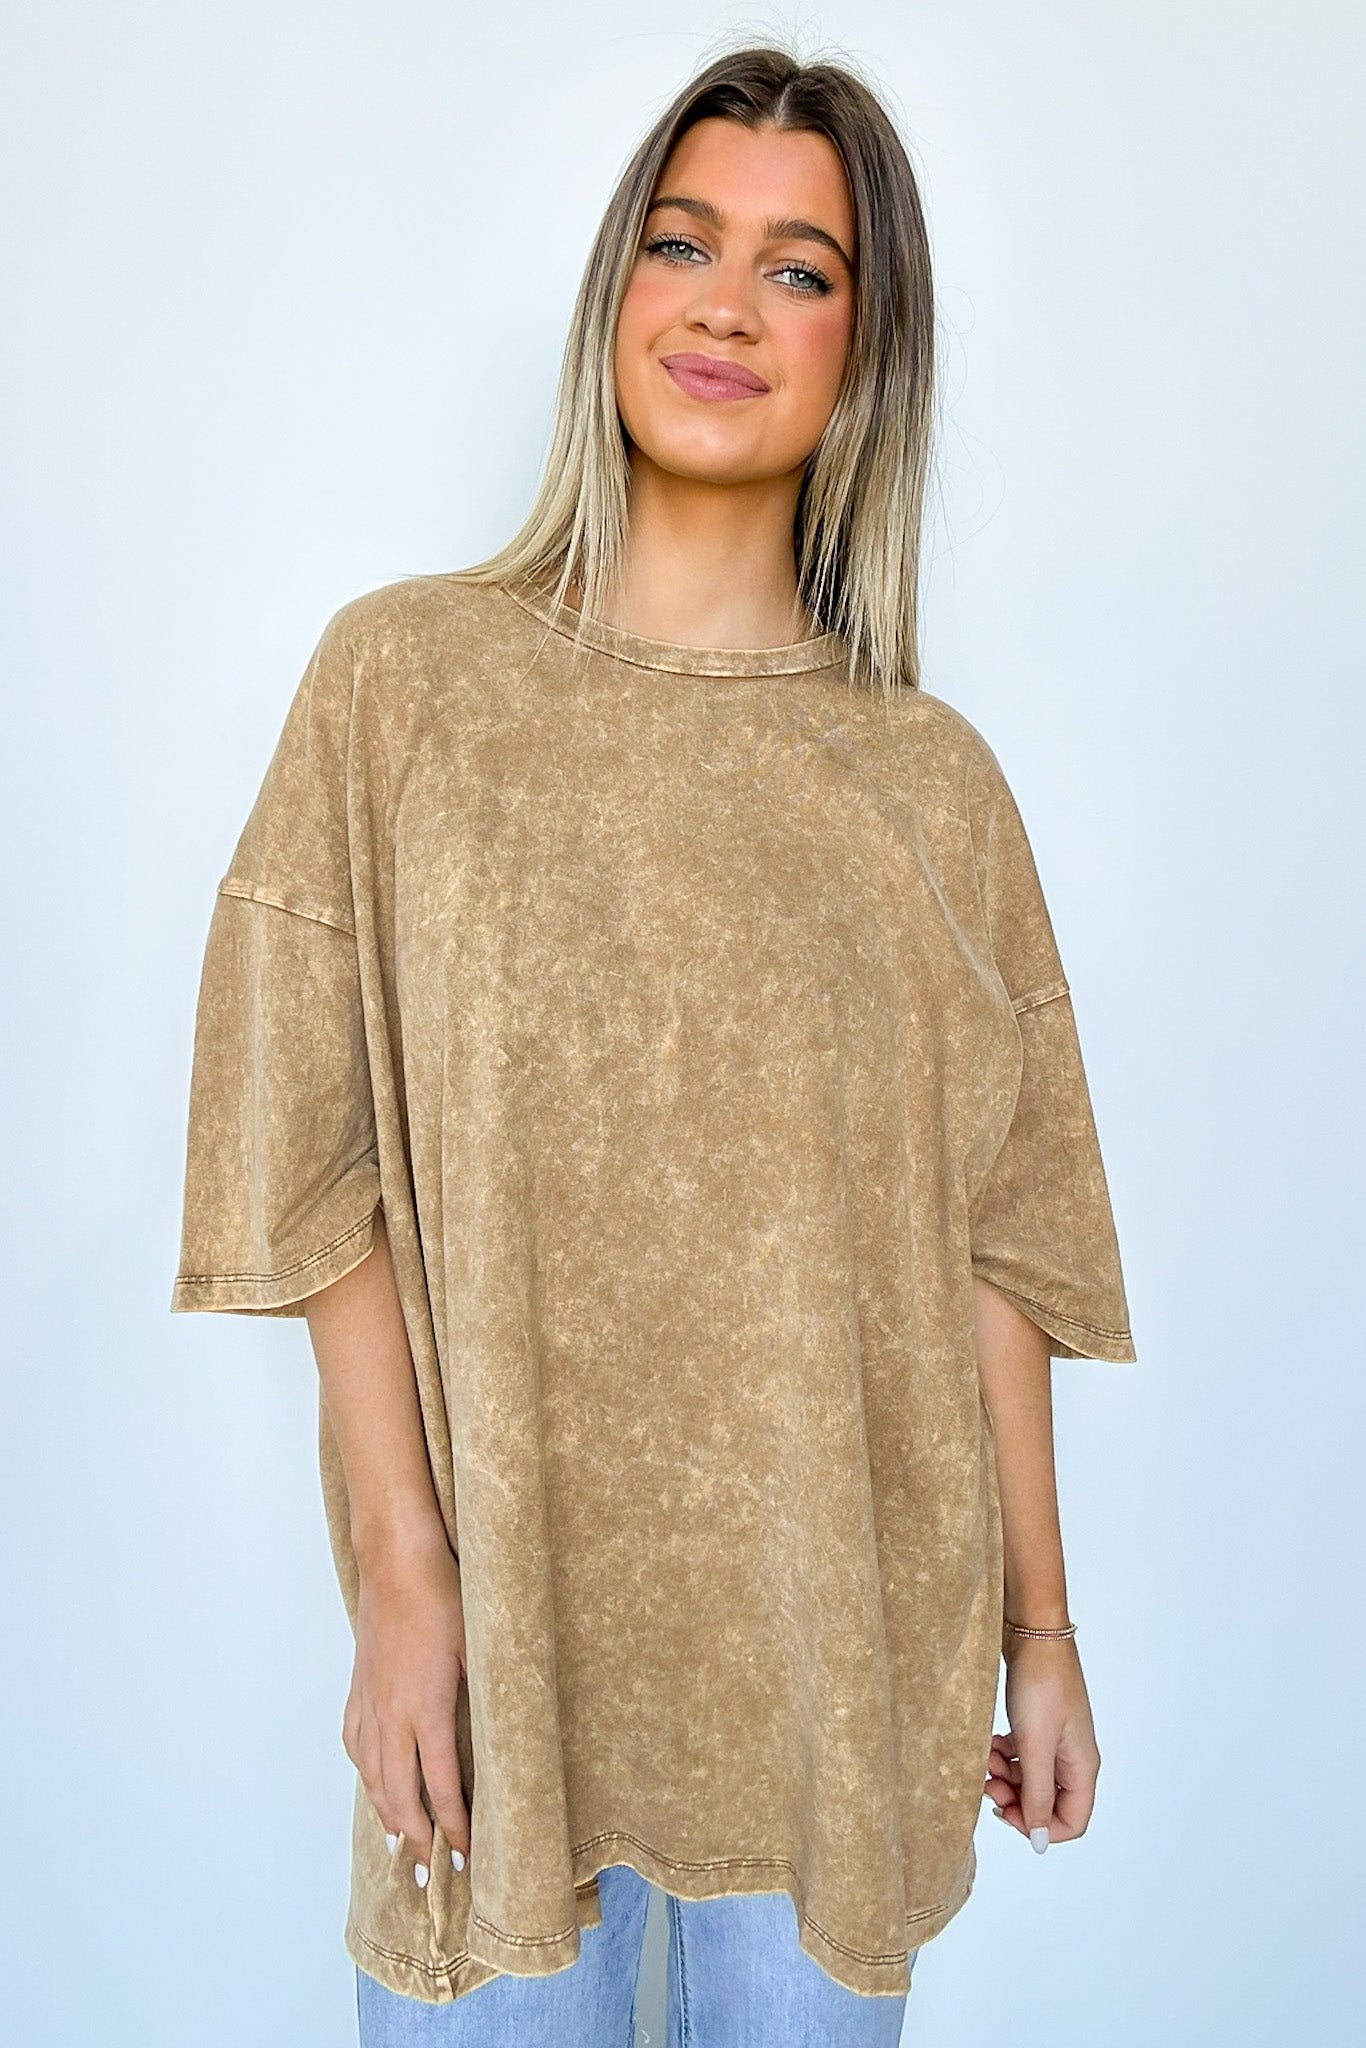 Weekend Awaits Mineral Wash Oversized Top - BACK IN STOCK